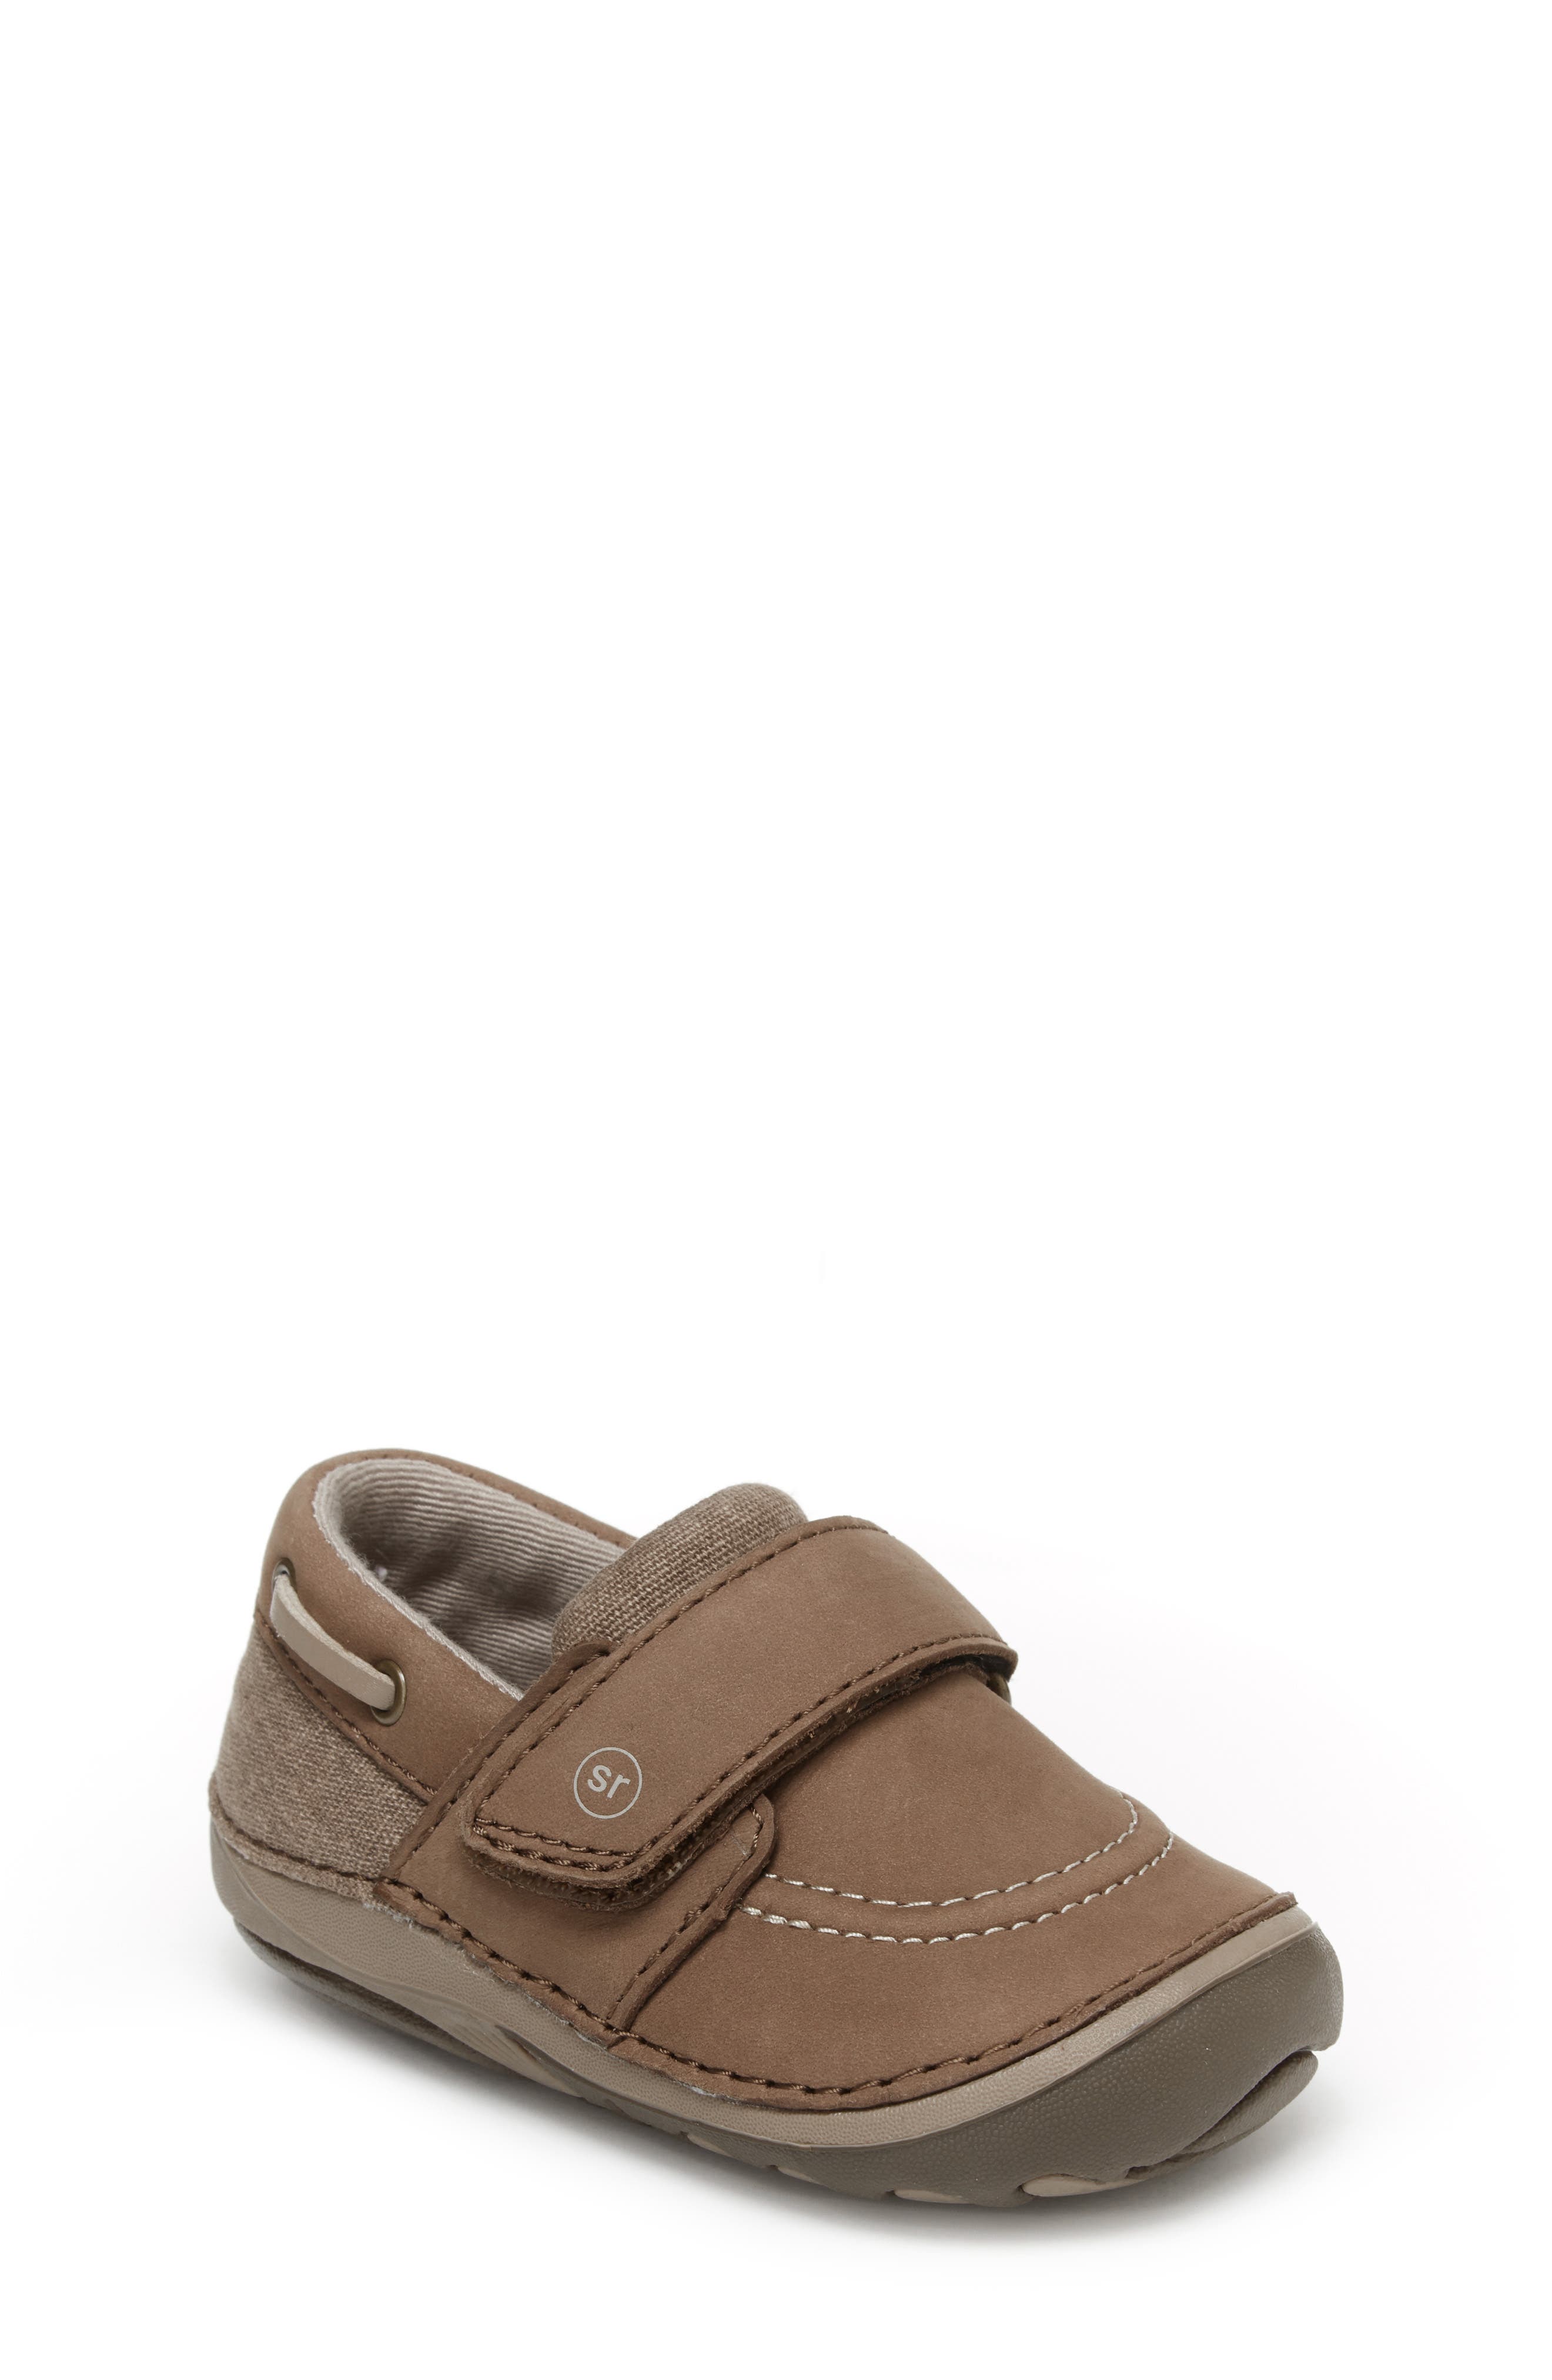 nordstrom baby boots